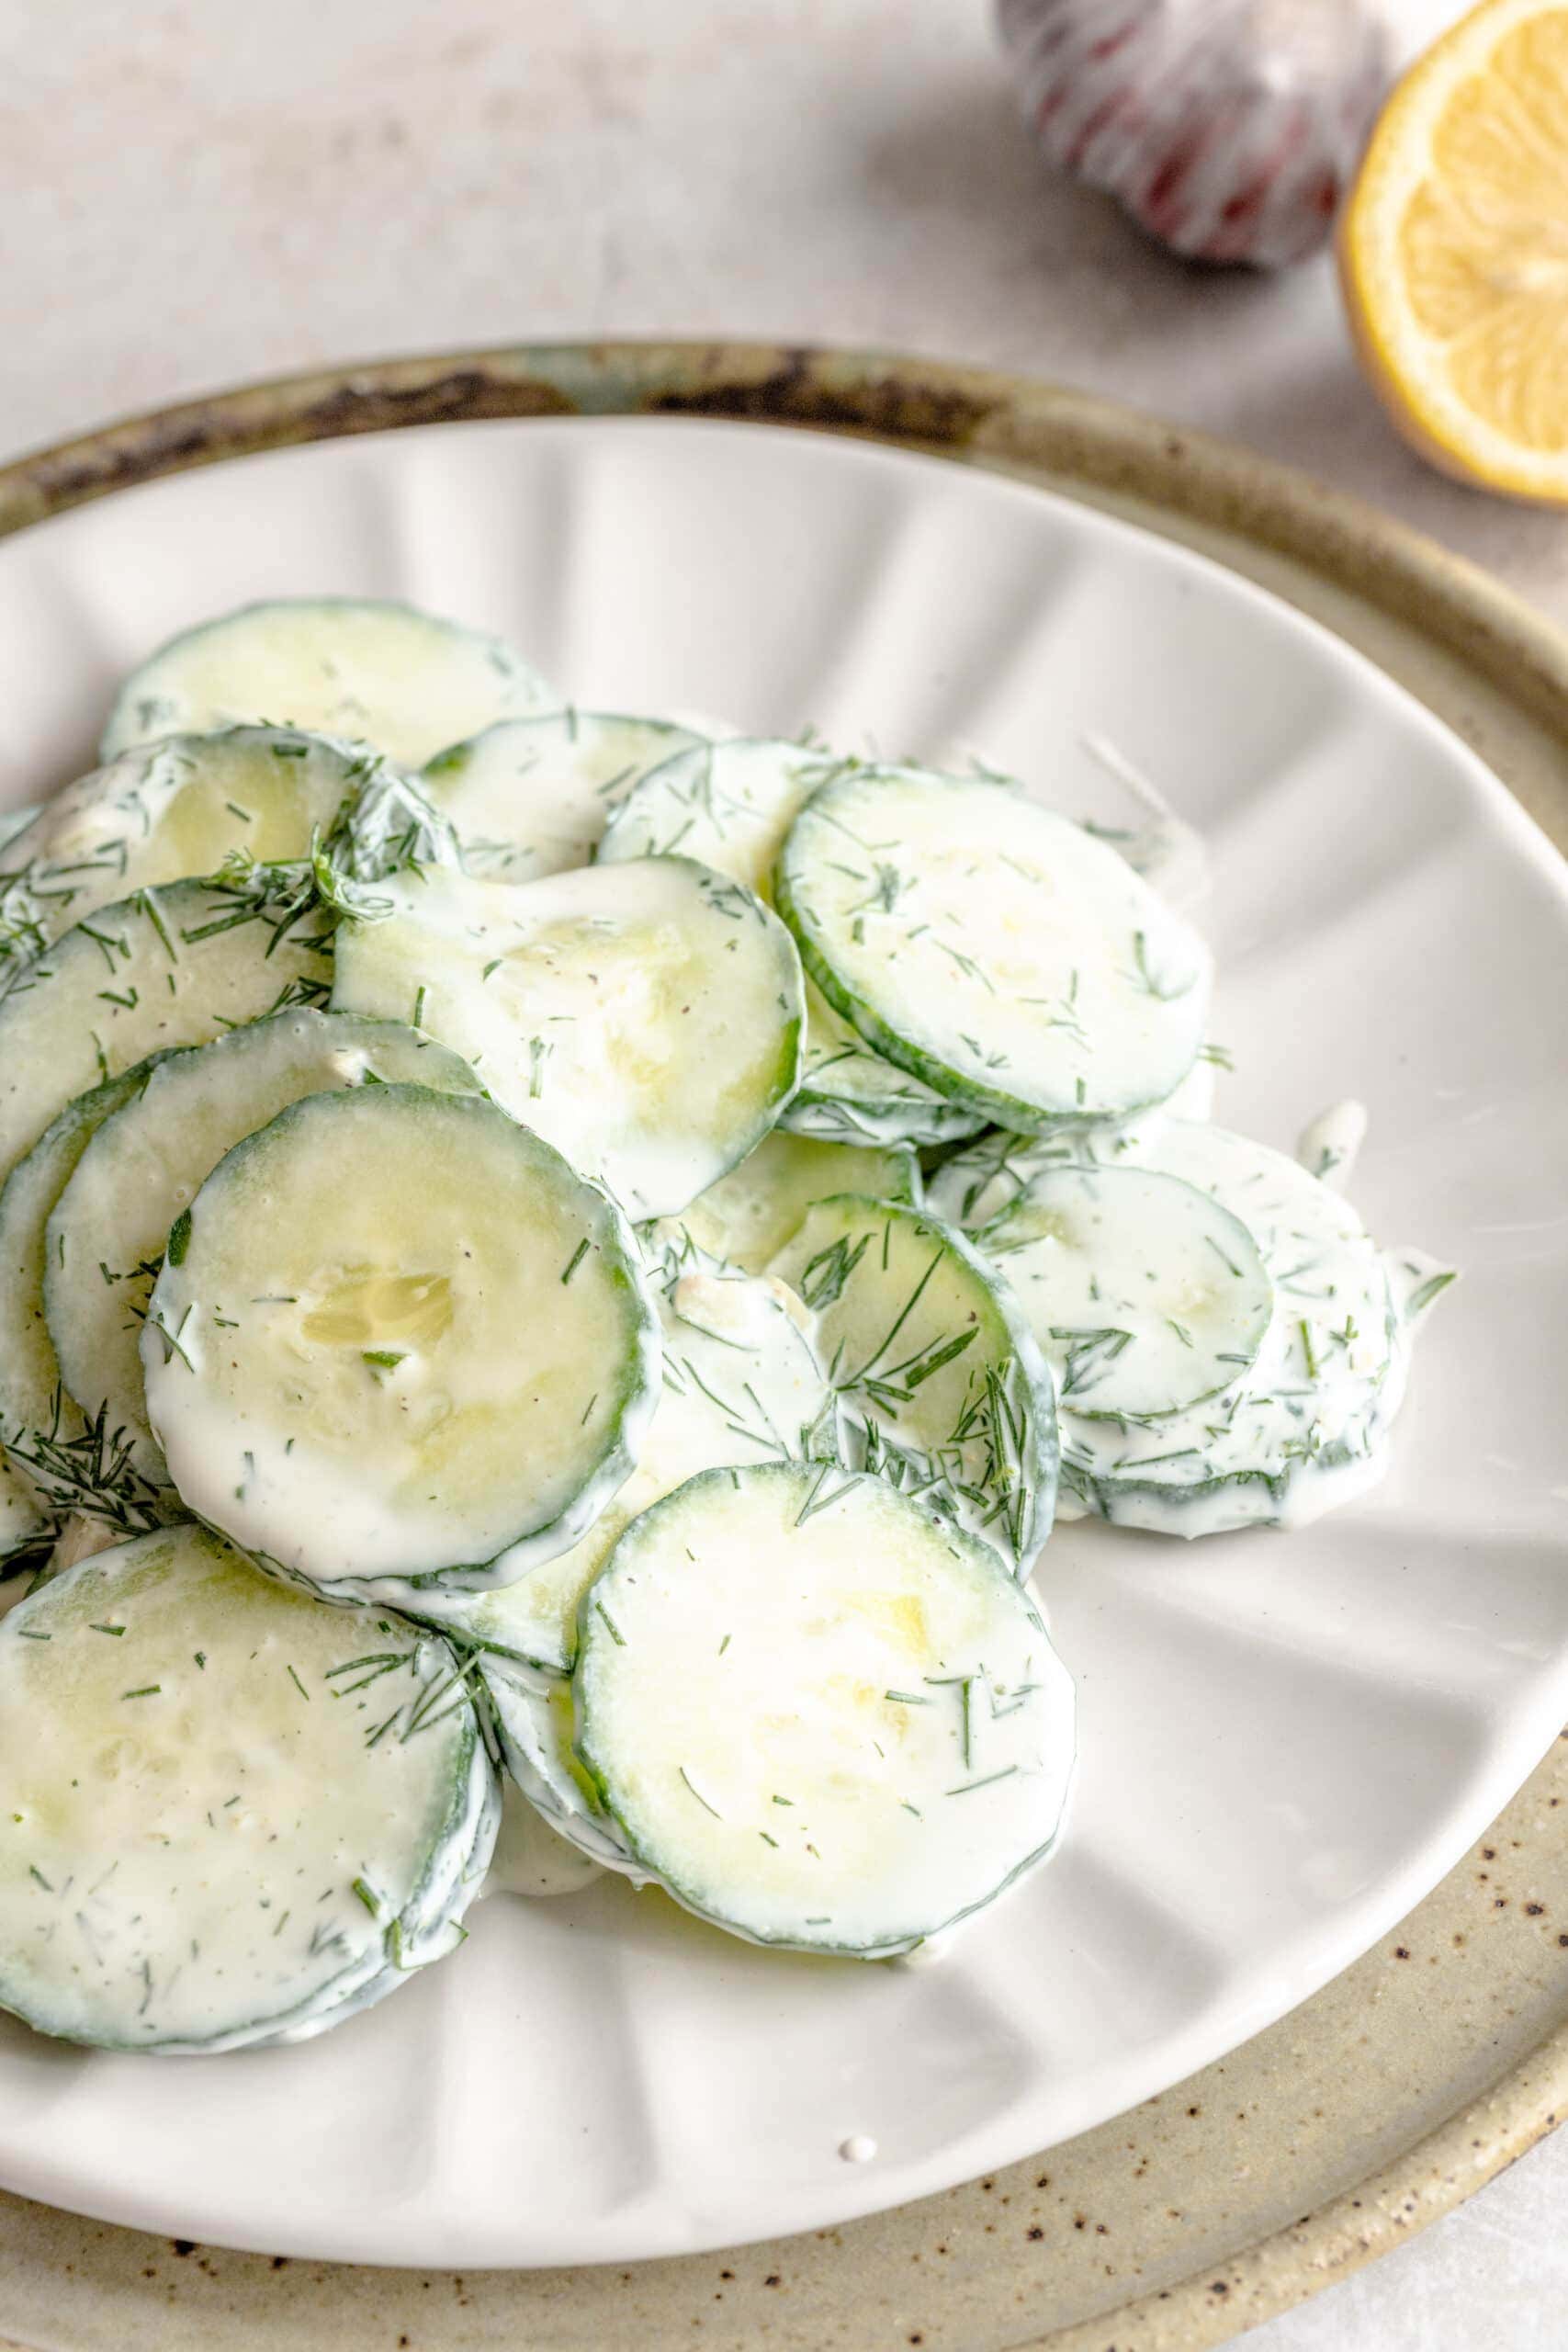 Up close of the gurken salat - cucumber salad - on a white plate layered on a neutral ceramic plate.